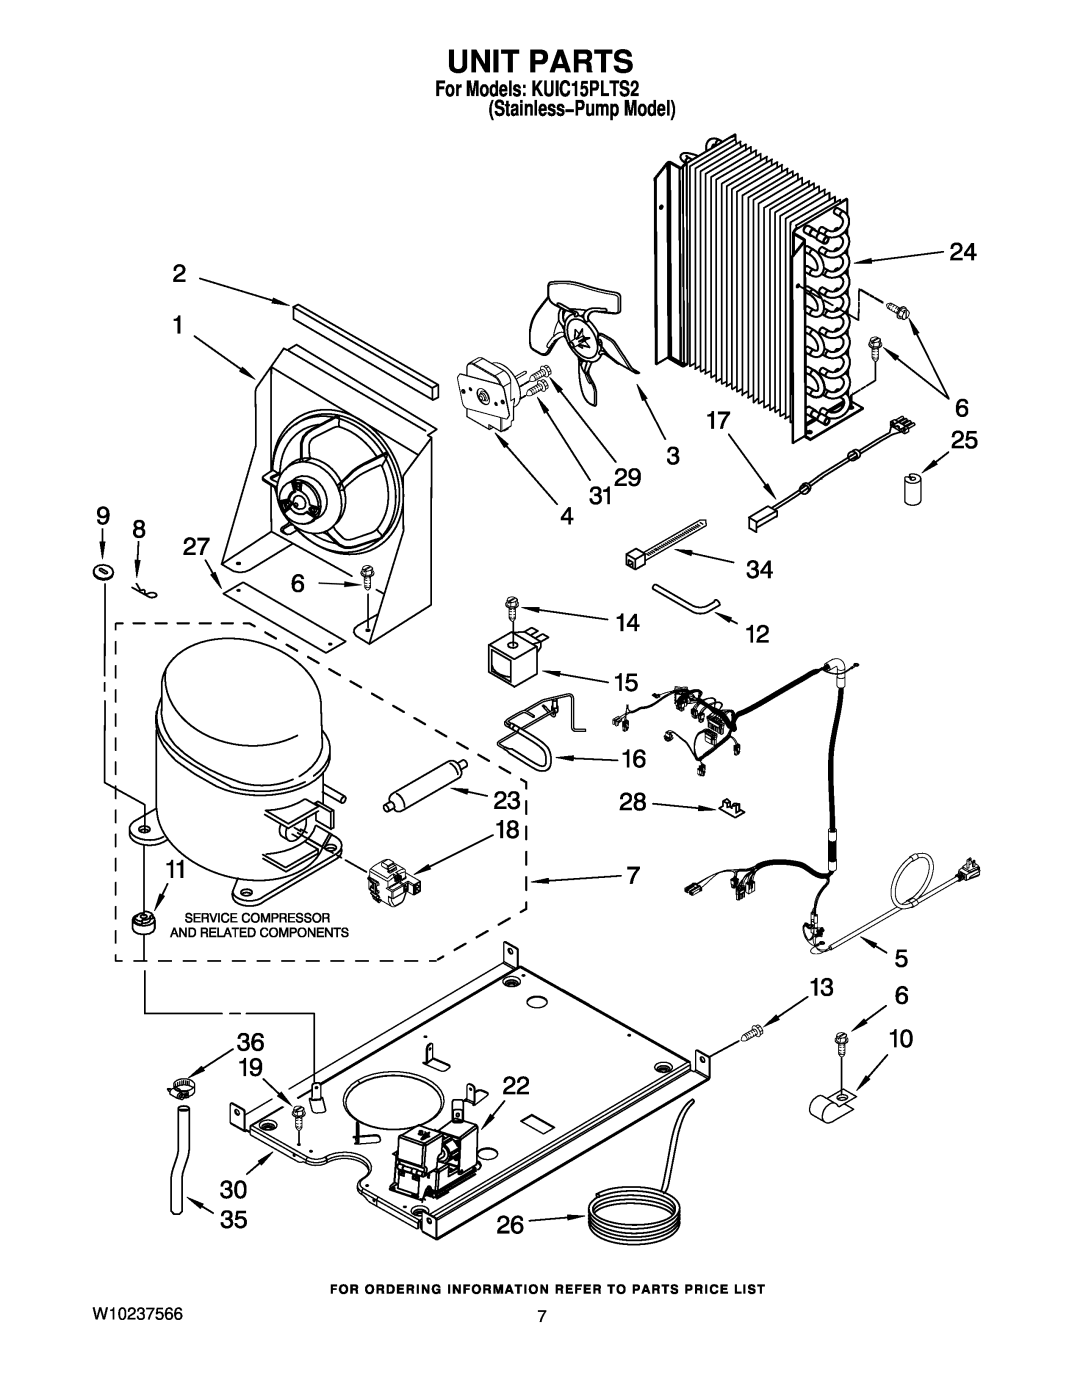 KitchenAid manual Unit Parts, W10237566, For Models KUIC15PLTS2 Stainless−Pump Model 